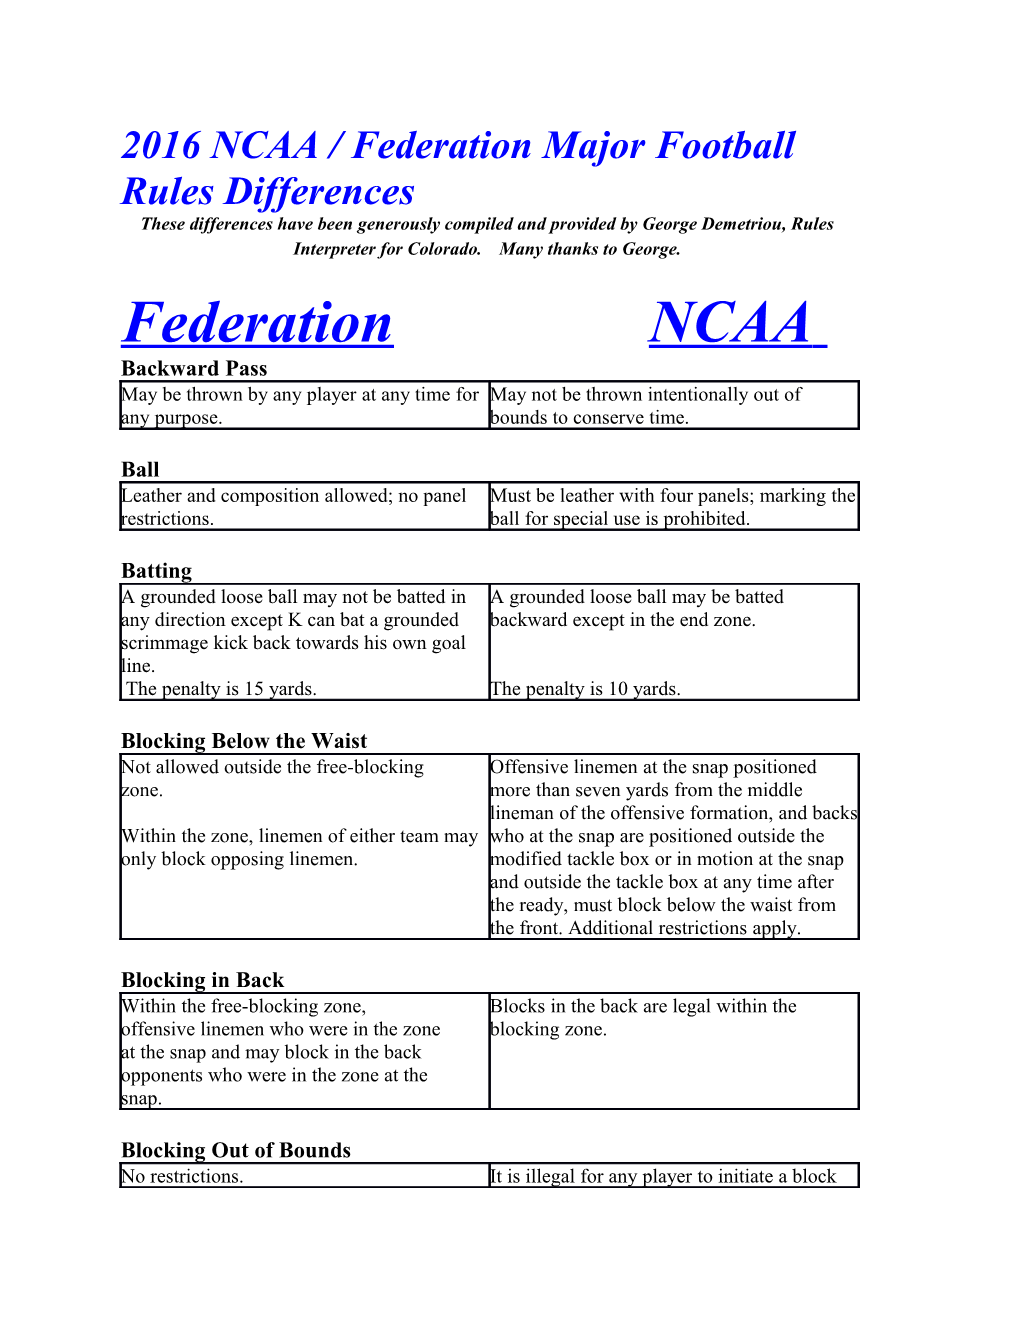 2016 NCAA / Federation Major Football Rules Differences